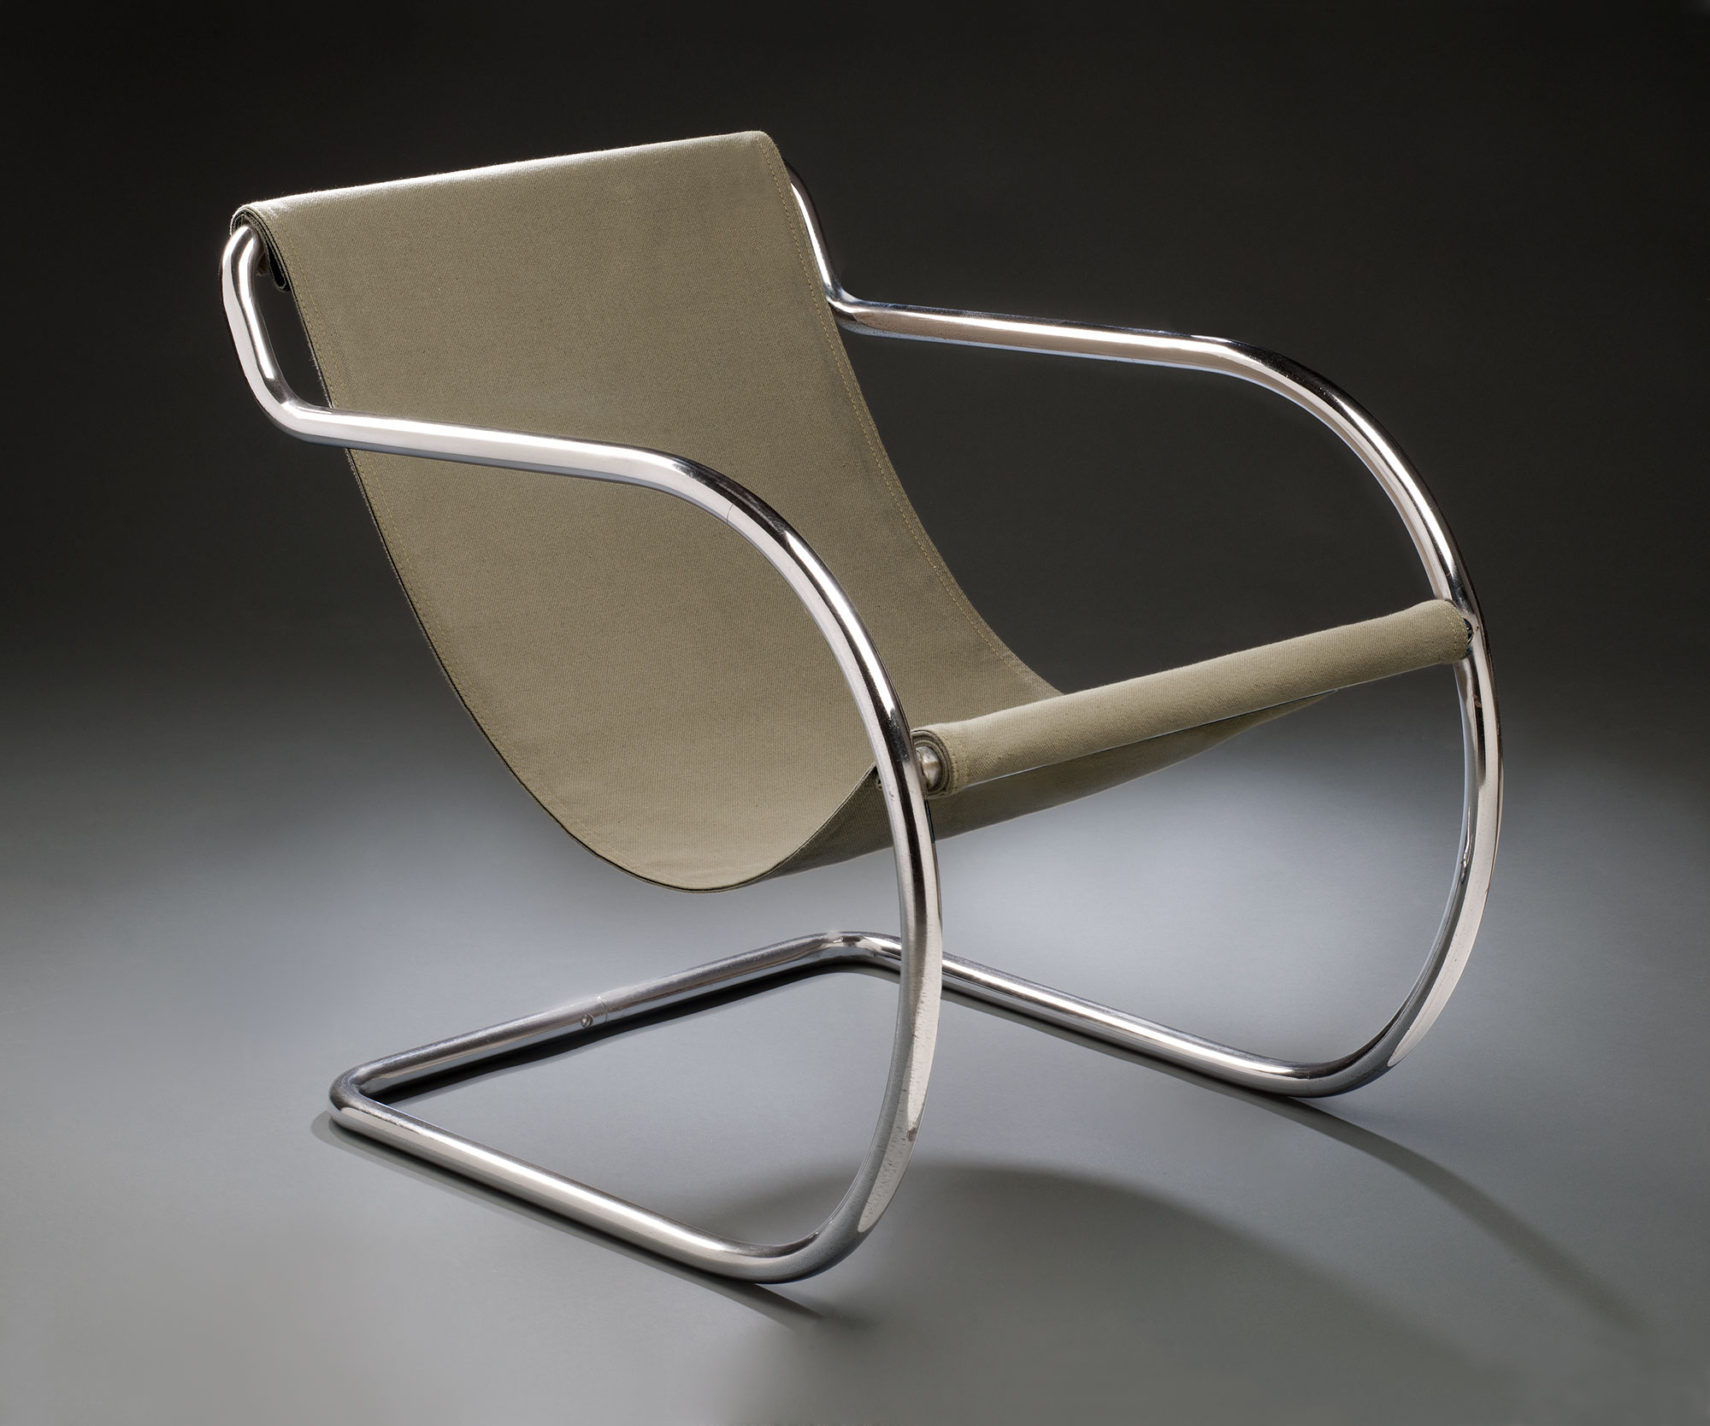 Armchair with a frame made of a continuous piece of curving tubular steel and the seat and back made from a piece of fabric suspended between two bars.